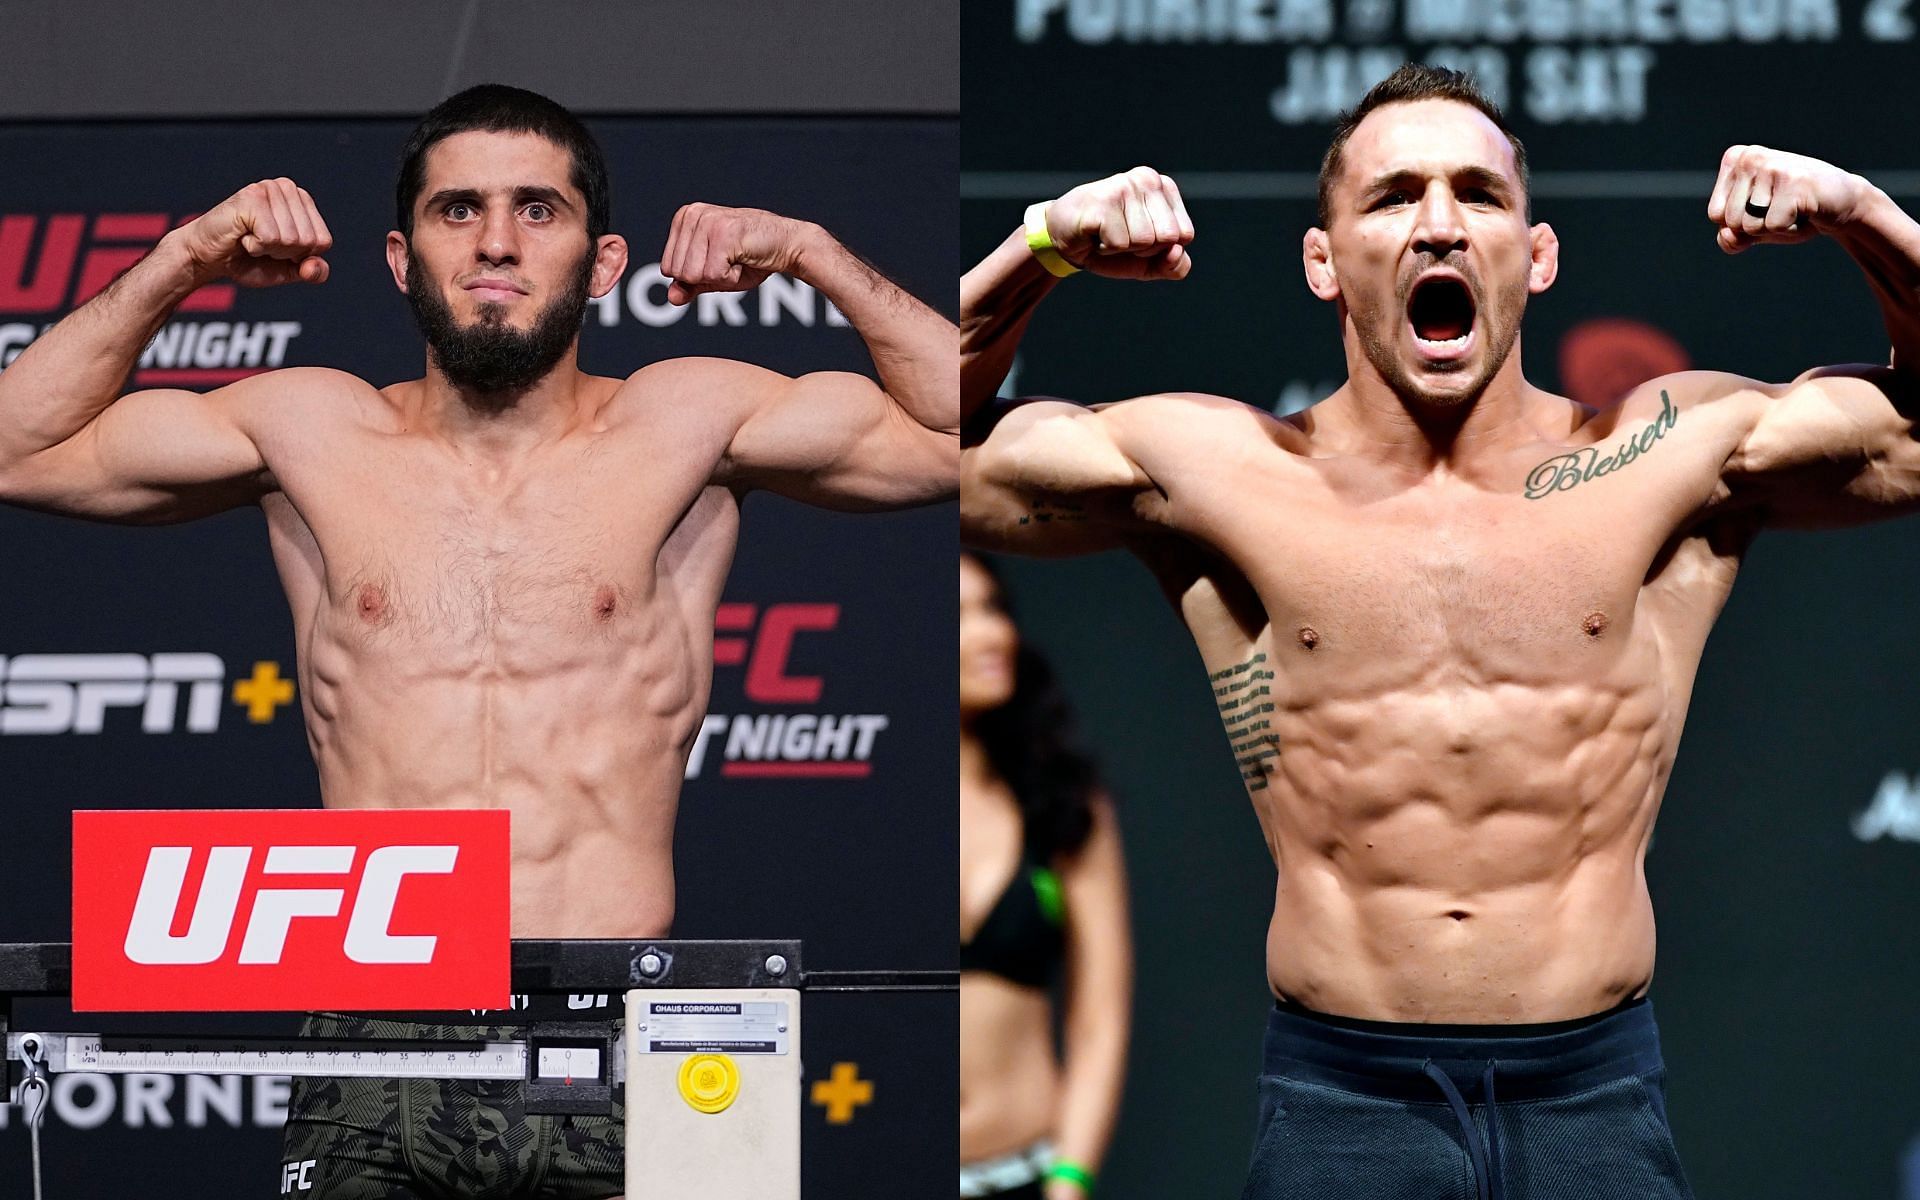 Islam Makhachev (left) and Michael Chandler (right) (Image credits Getty Images)